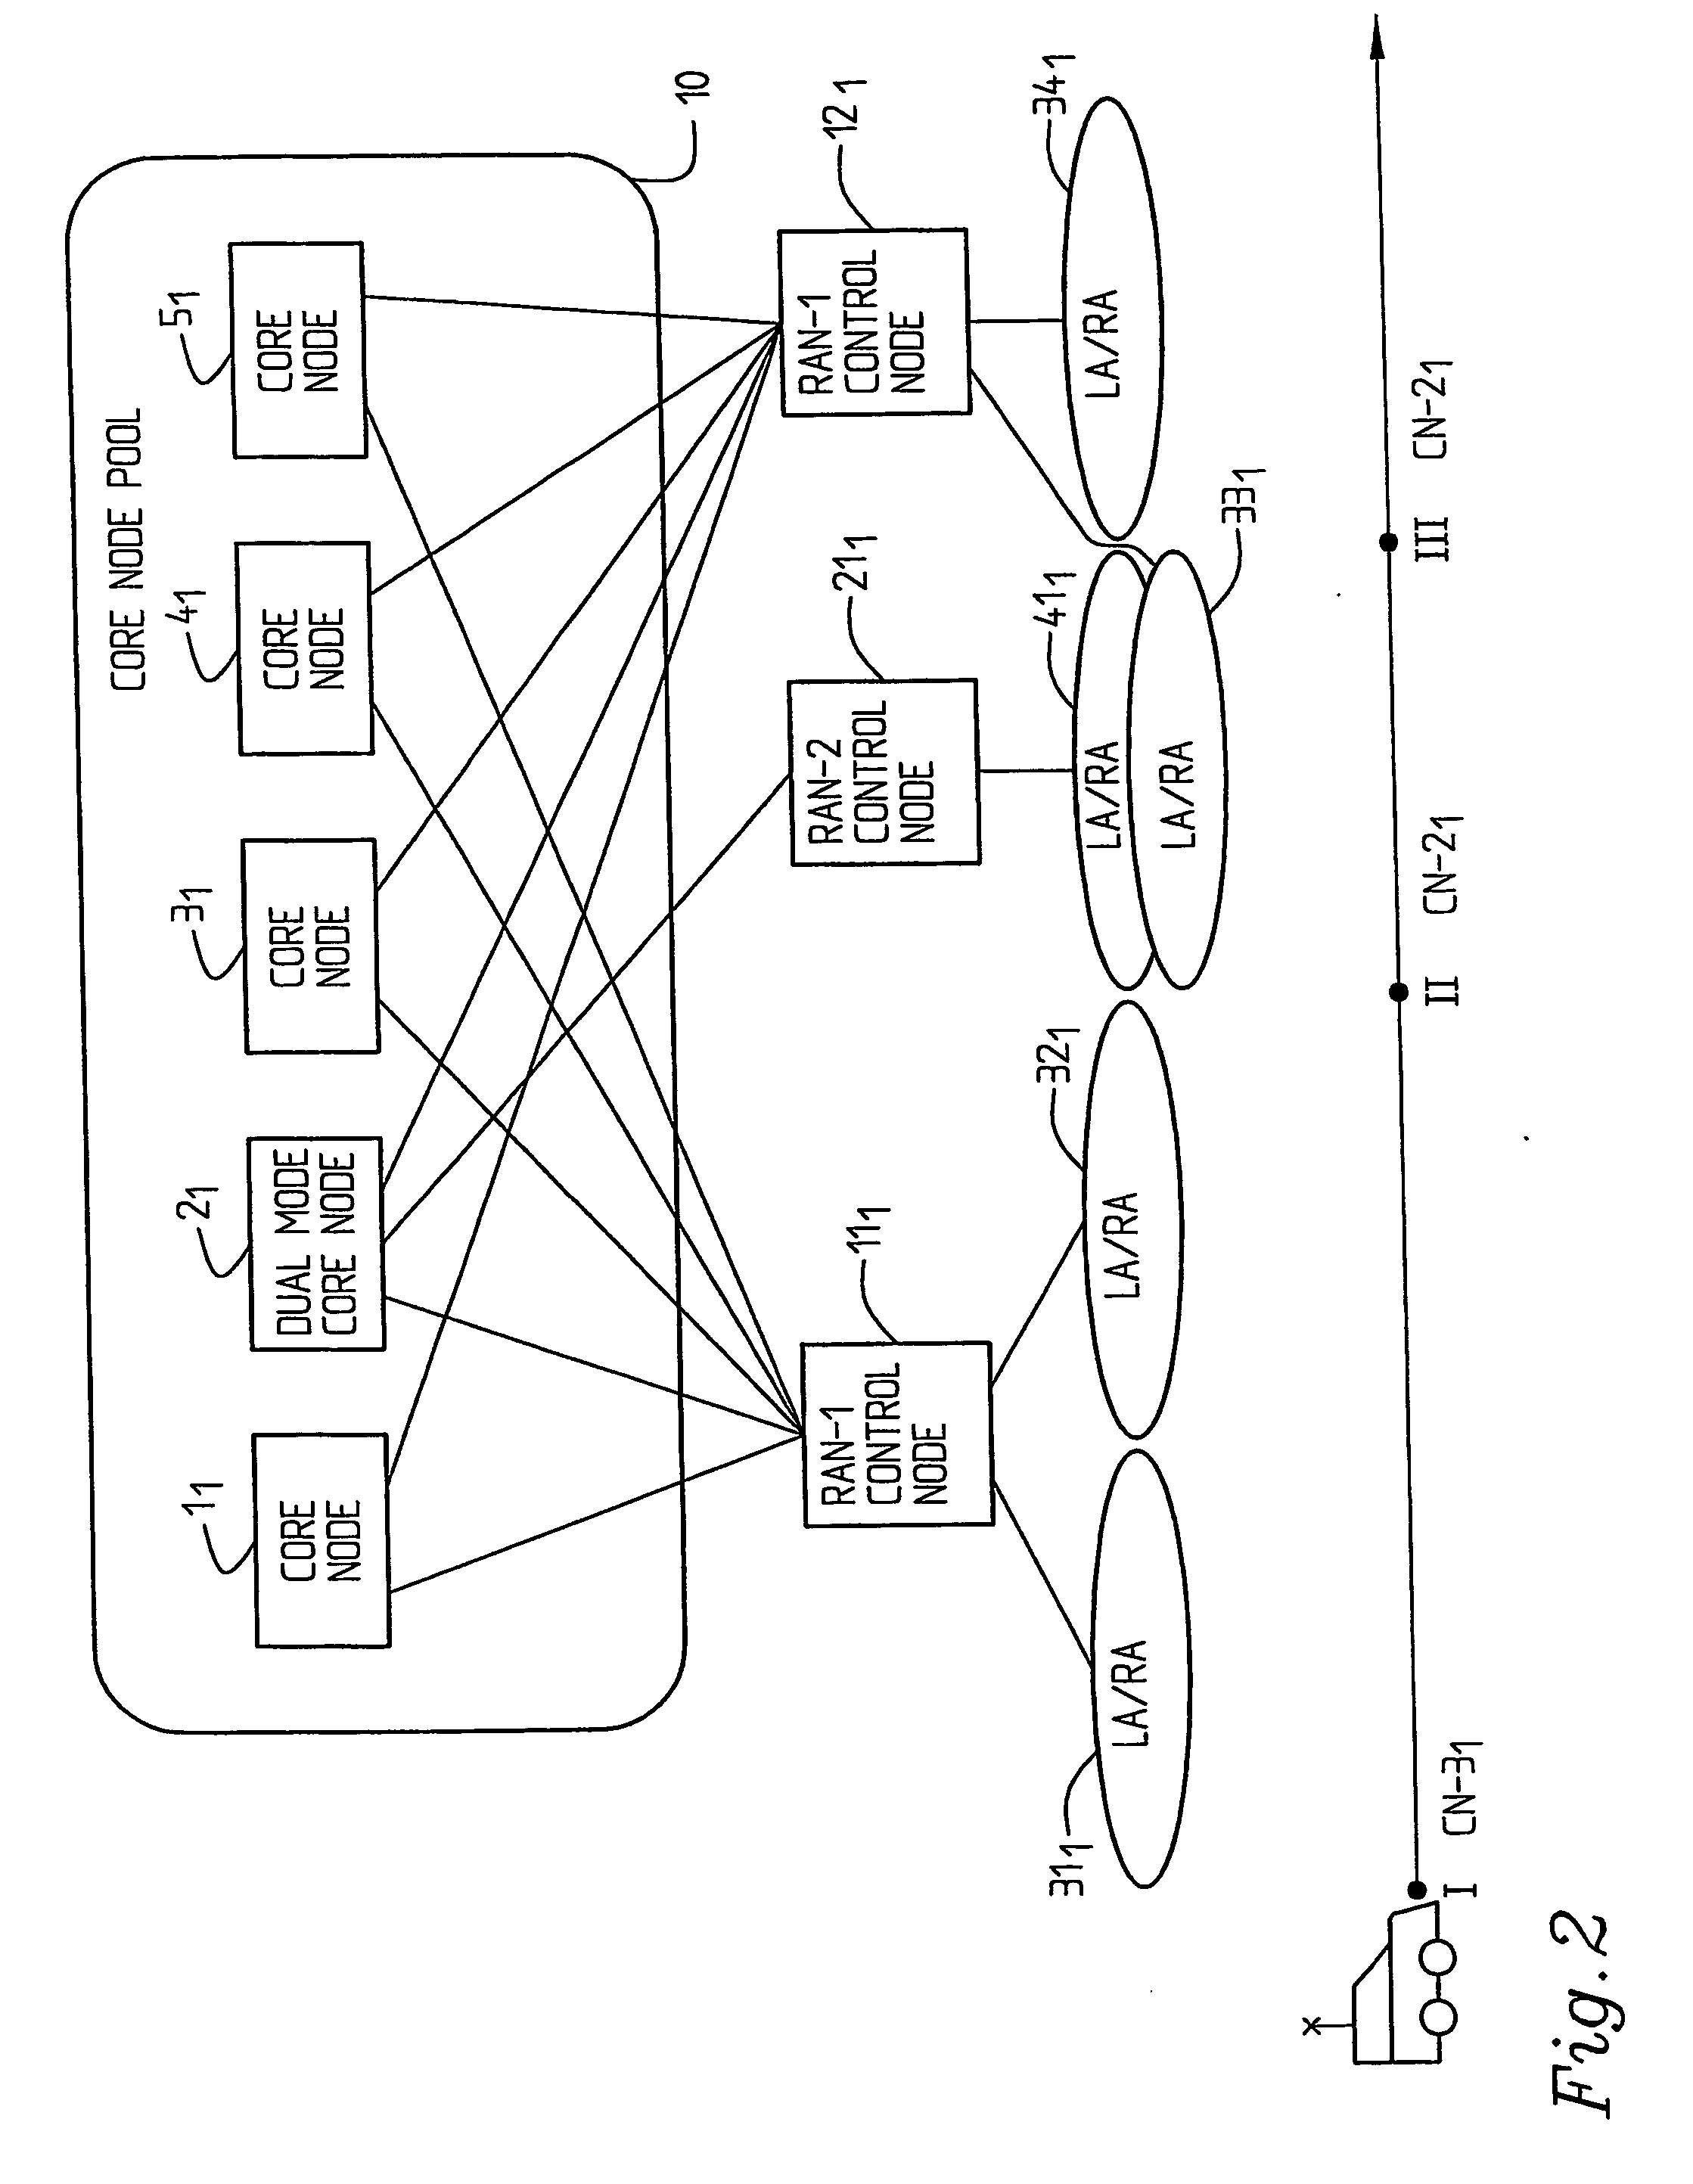 Mobile Station Moving in Communications Systems Supporting Communication of Data